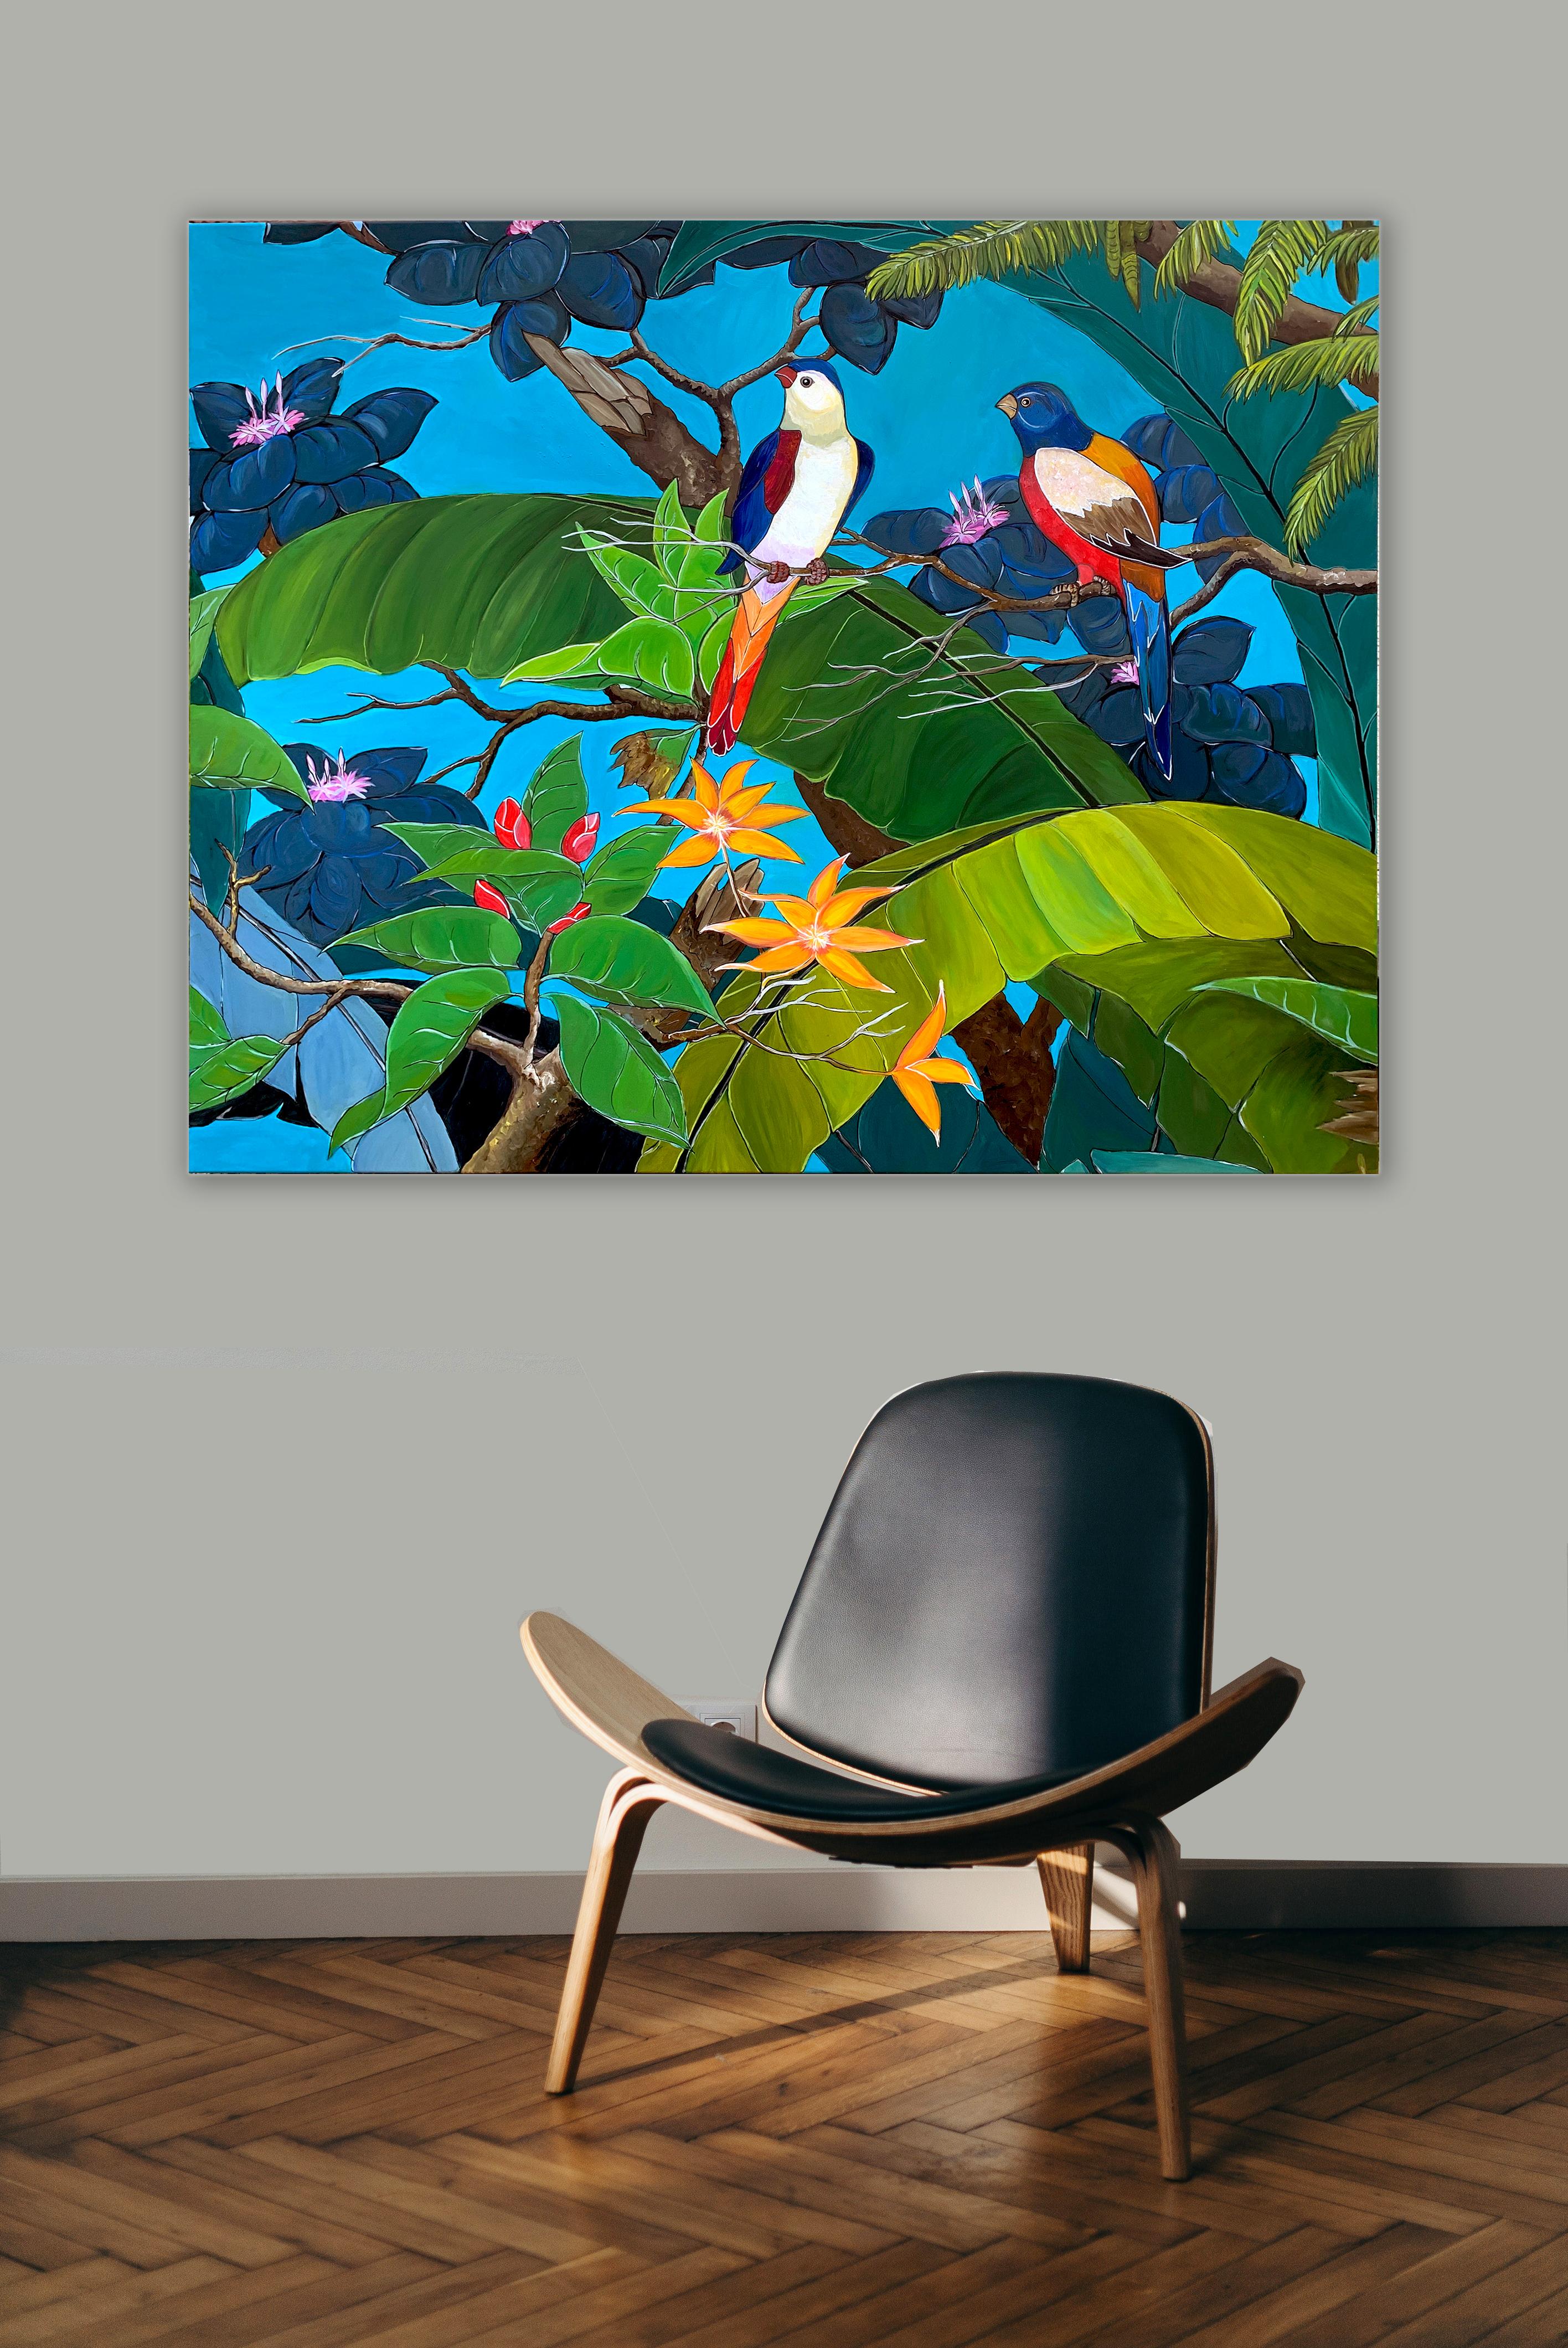 Date Night by Katharina Husslein Contemporary Jungle Landscape Painting 6